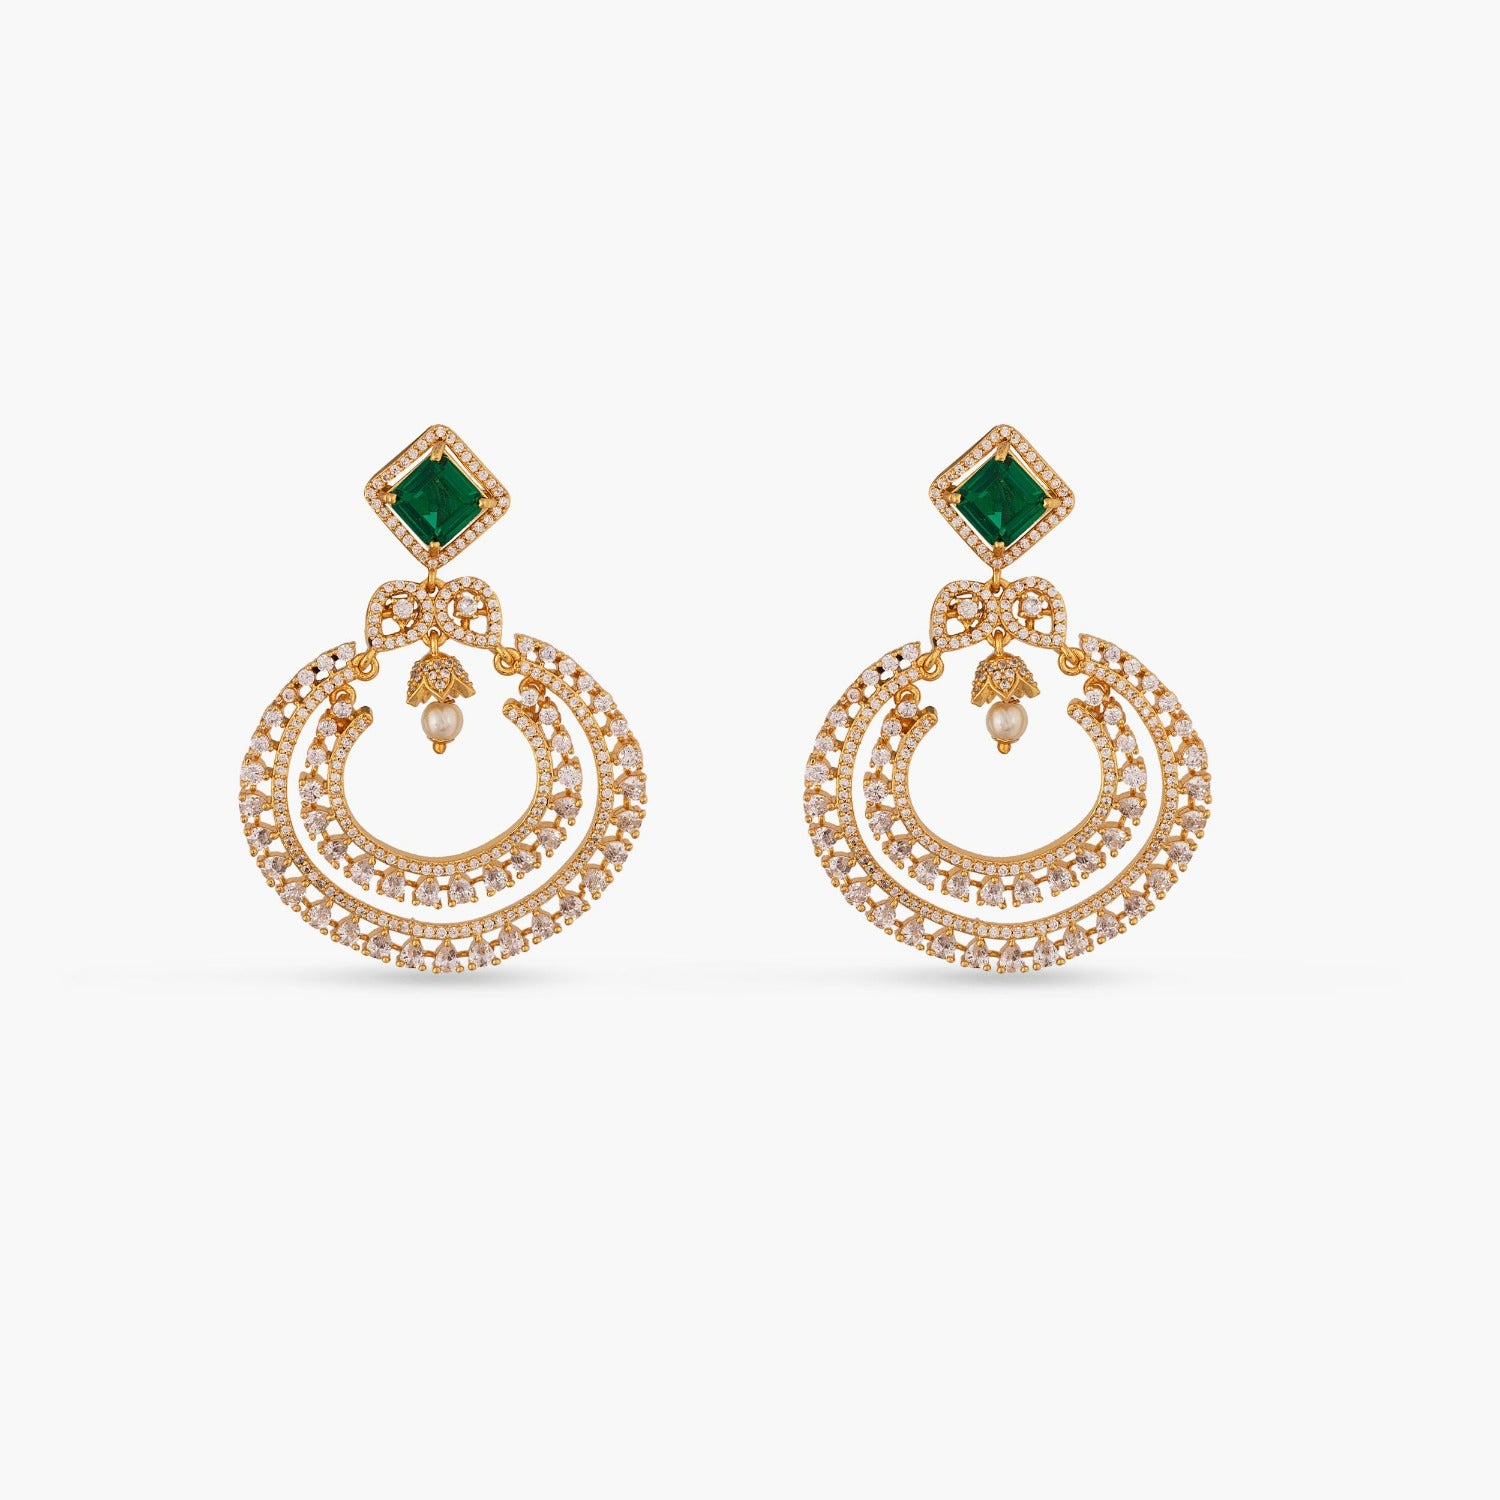 Chandbali earrings designs in gold polish with low price